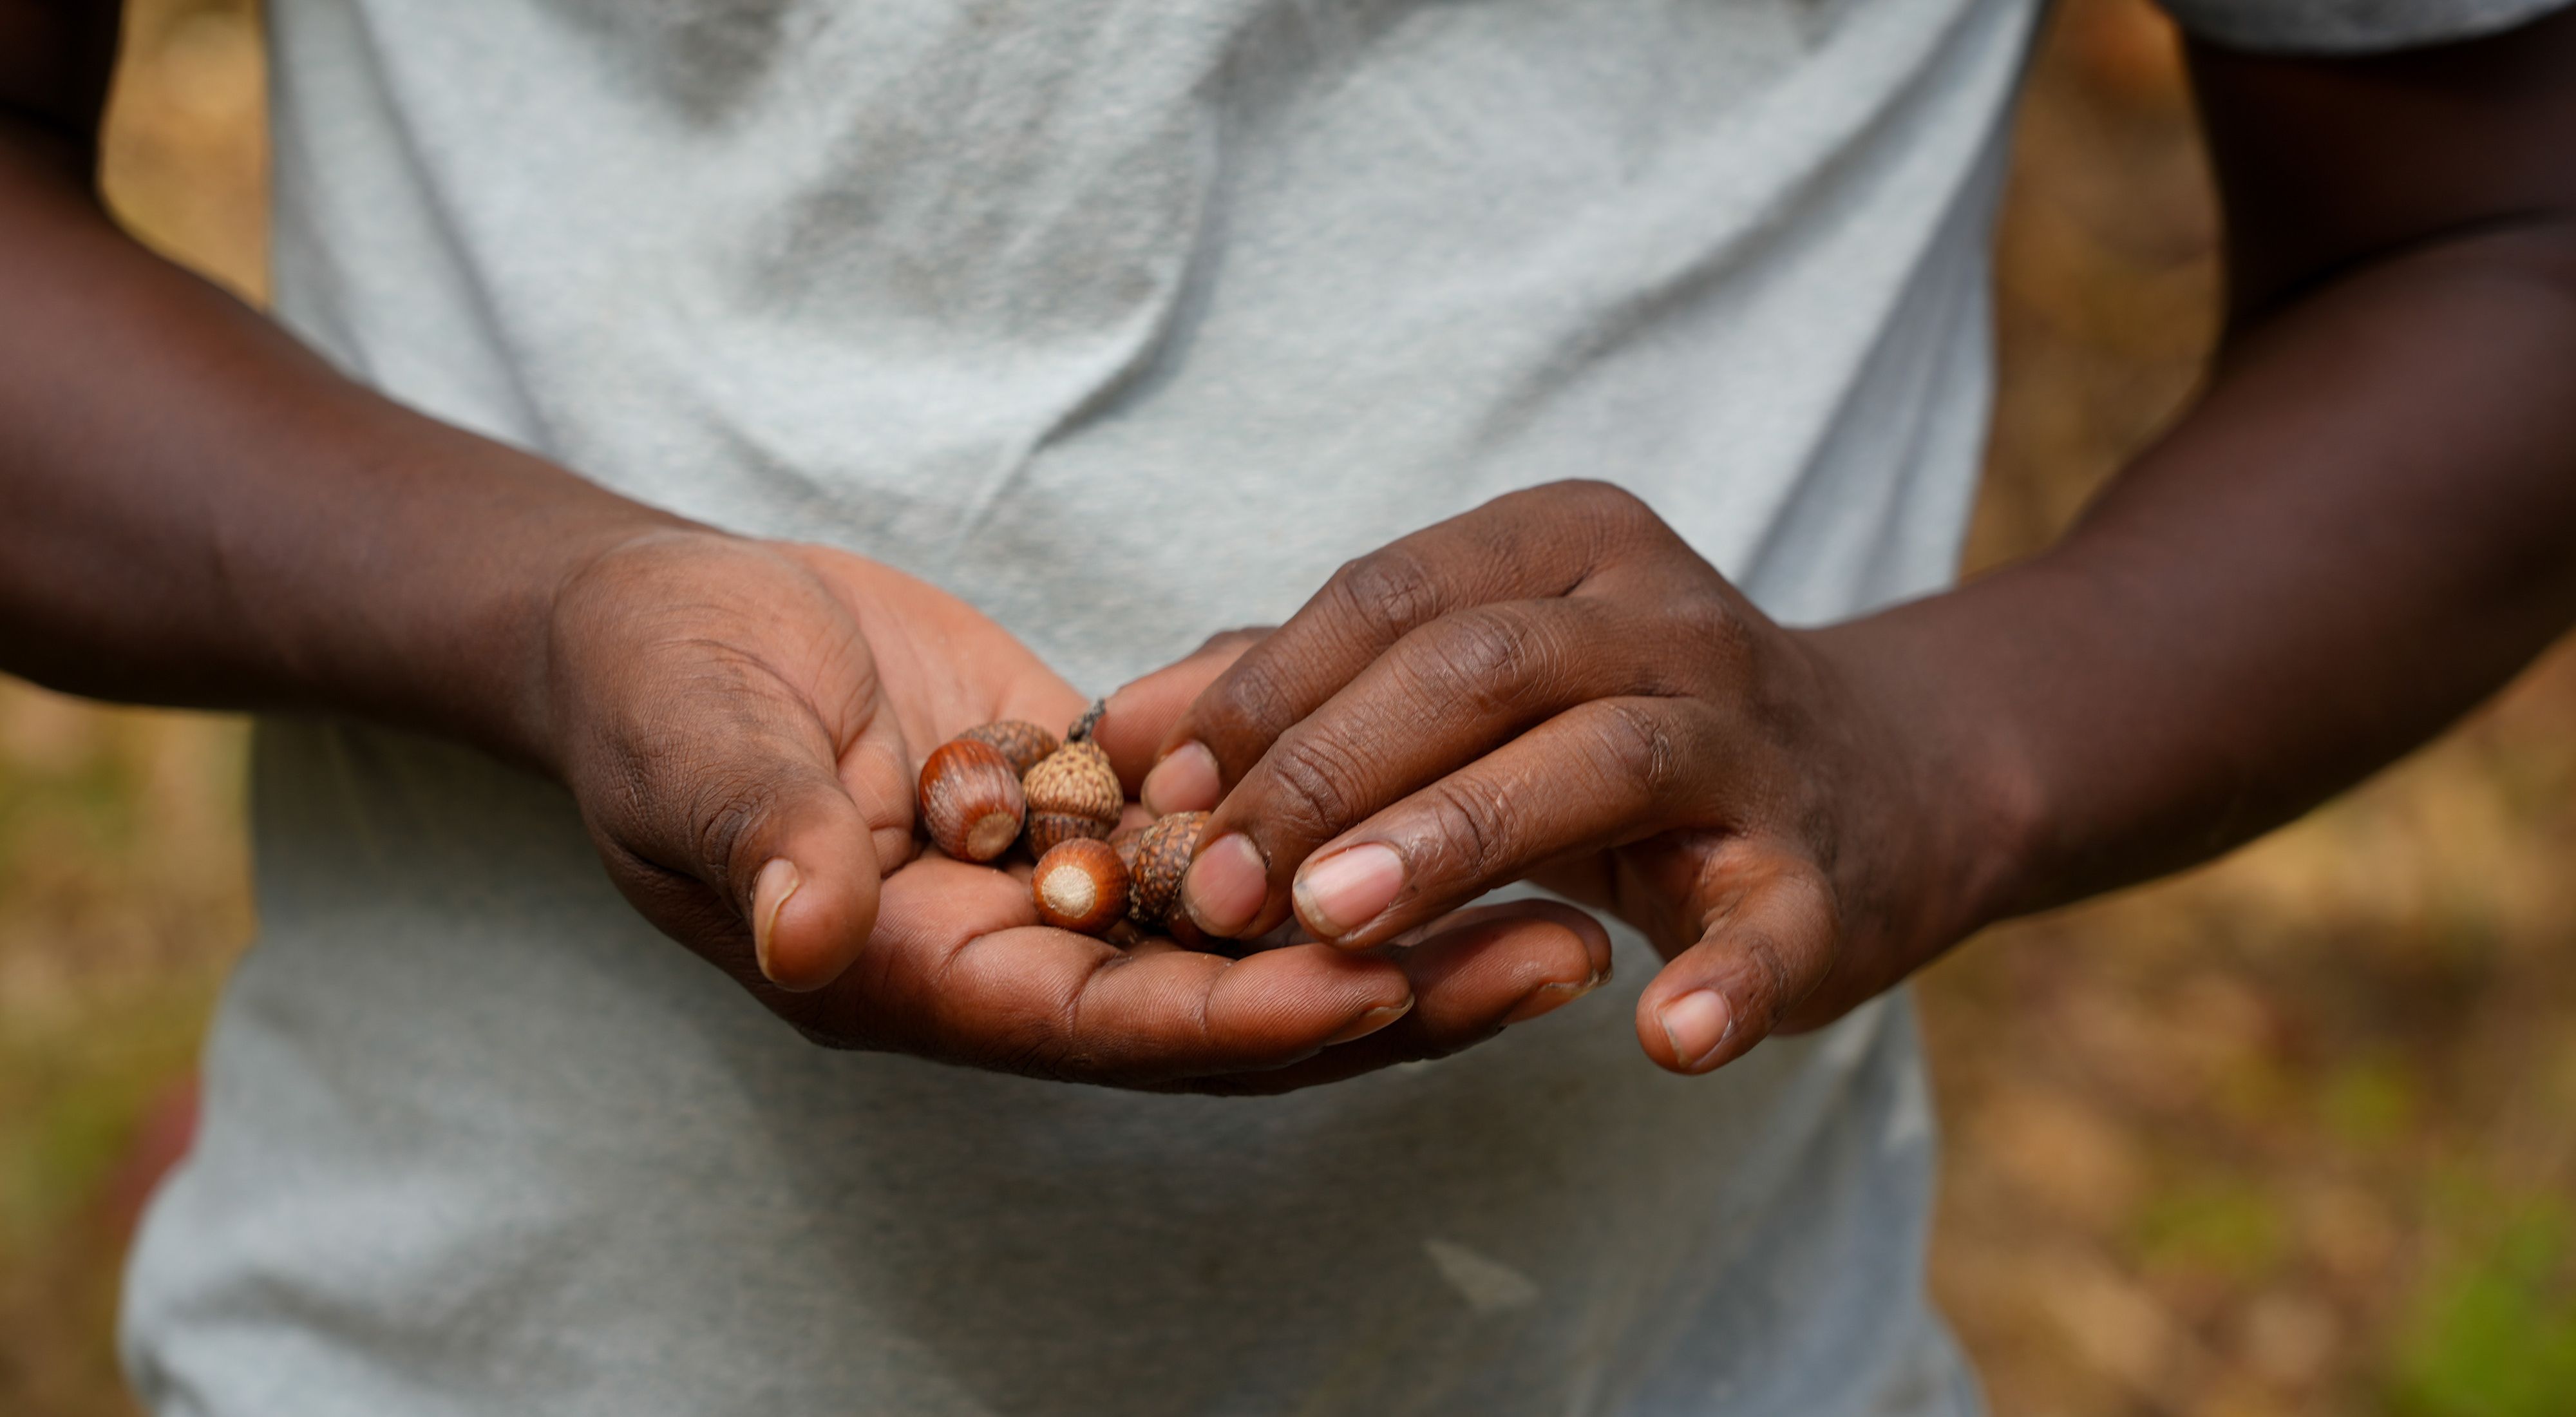 The hands of a person holding acorns.